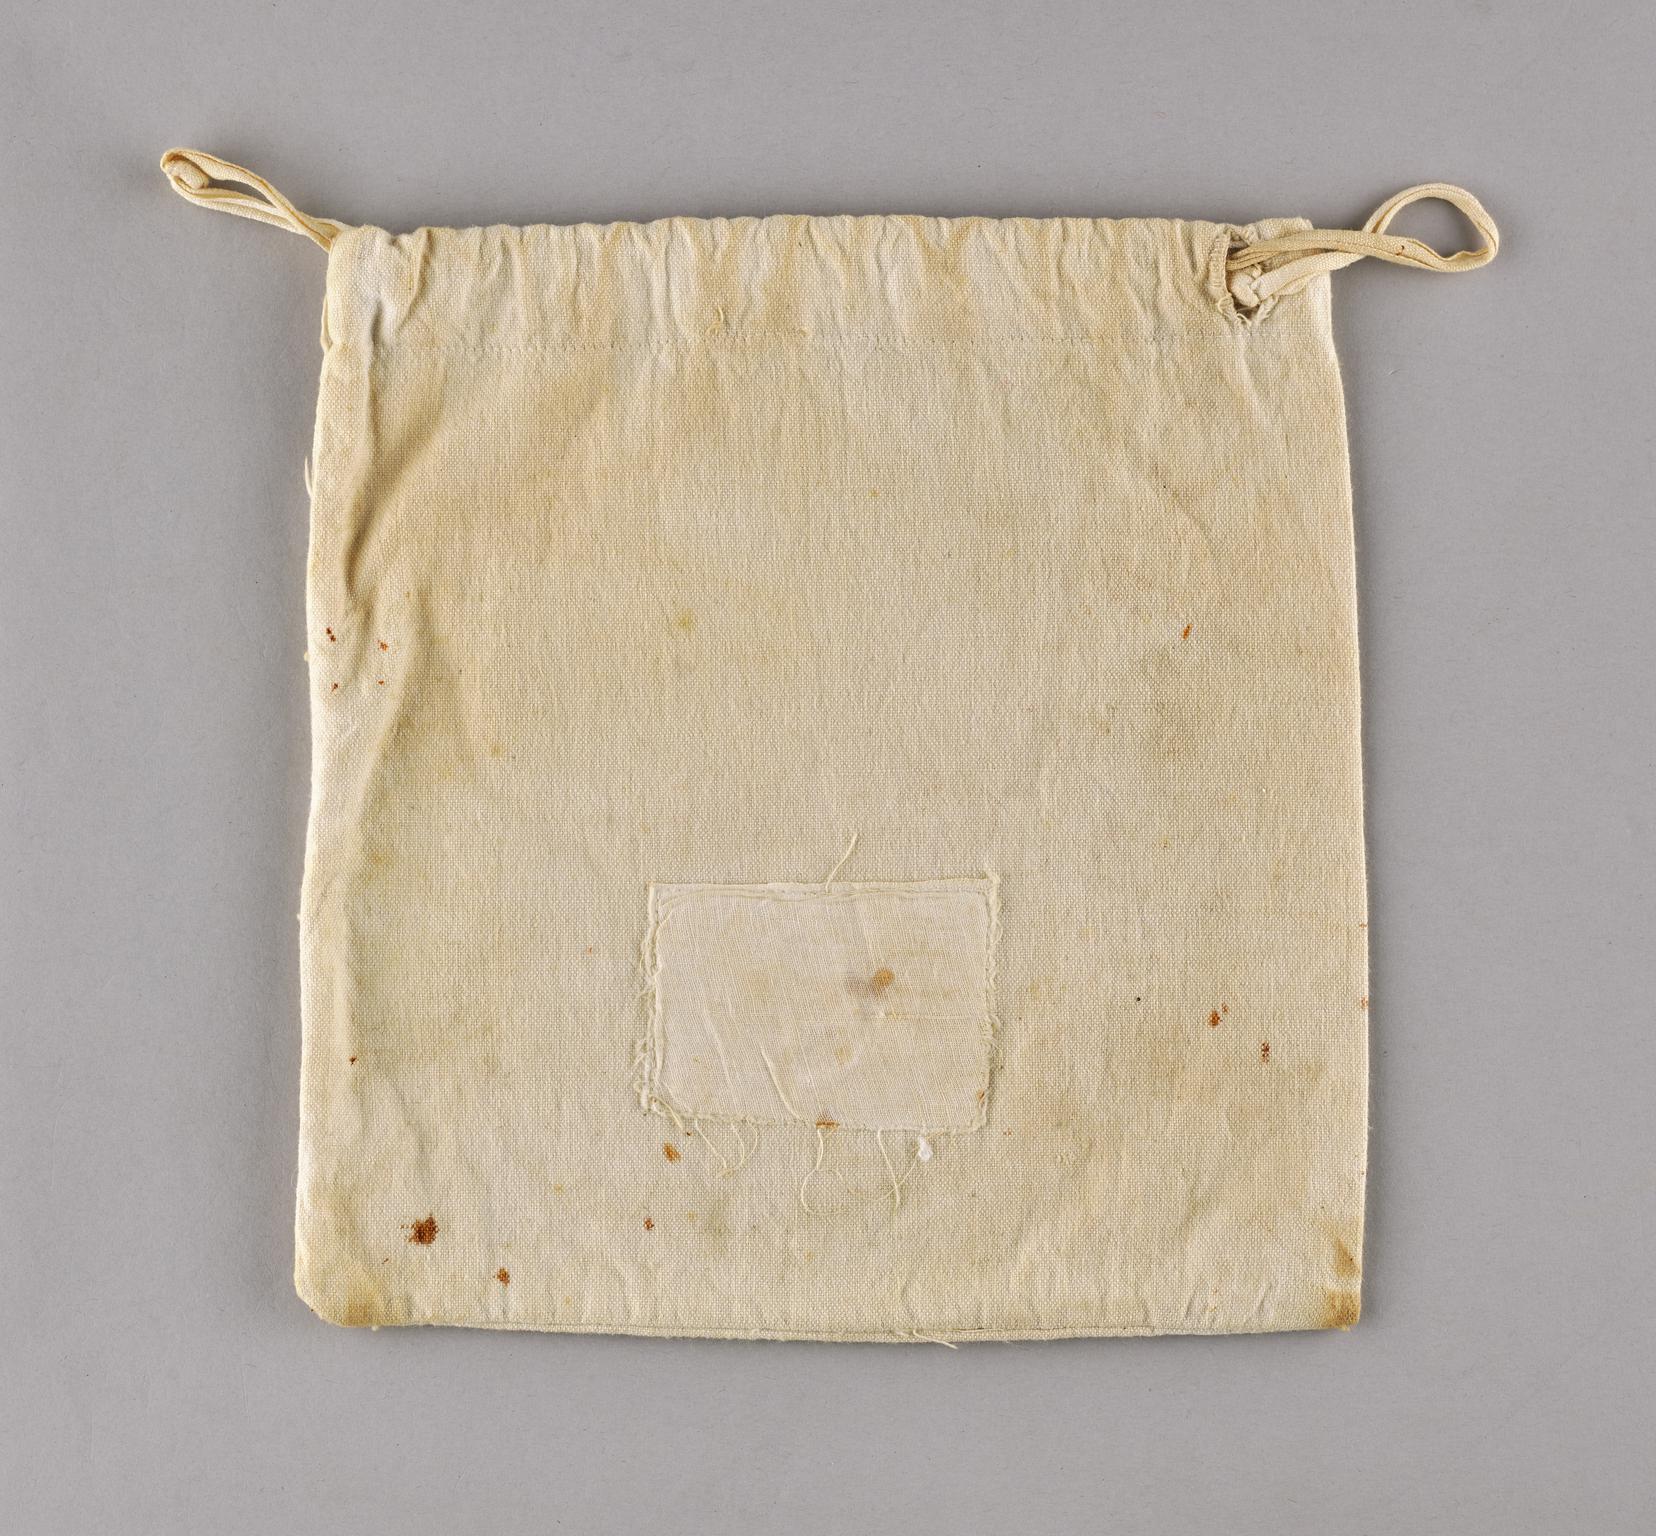 Pouch used to hold belongings.